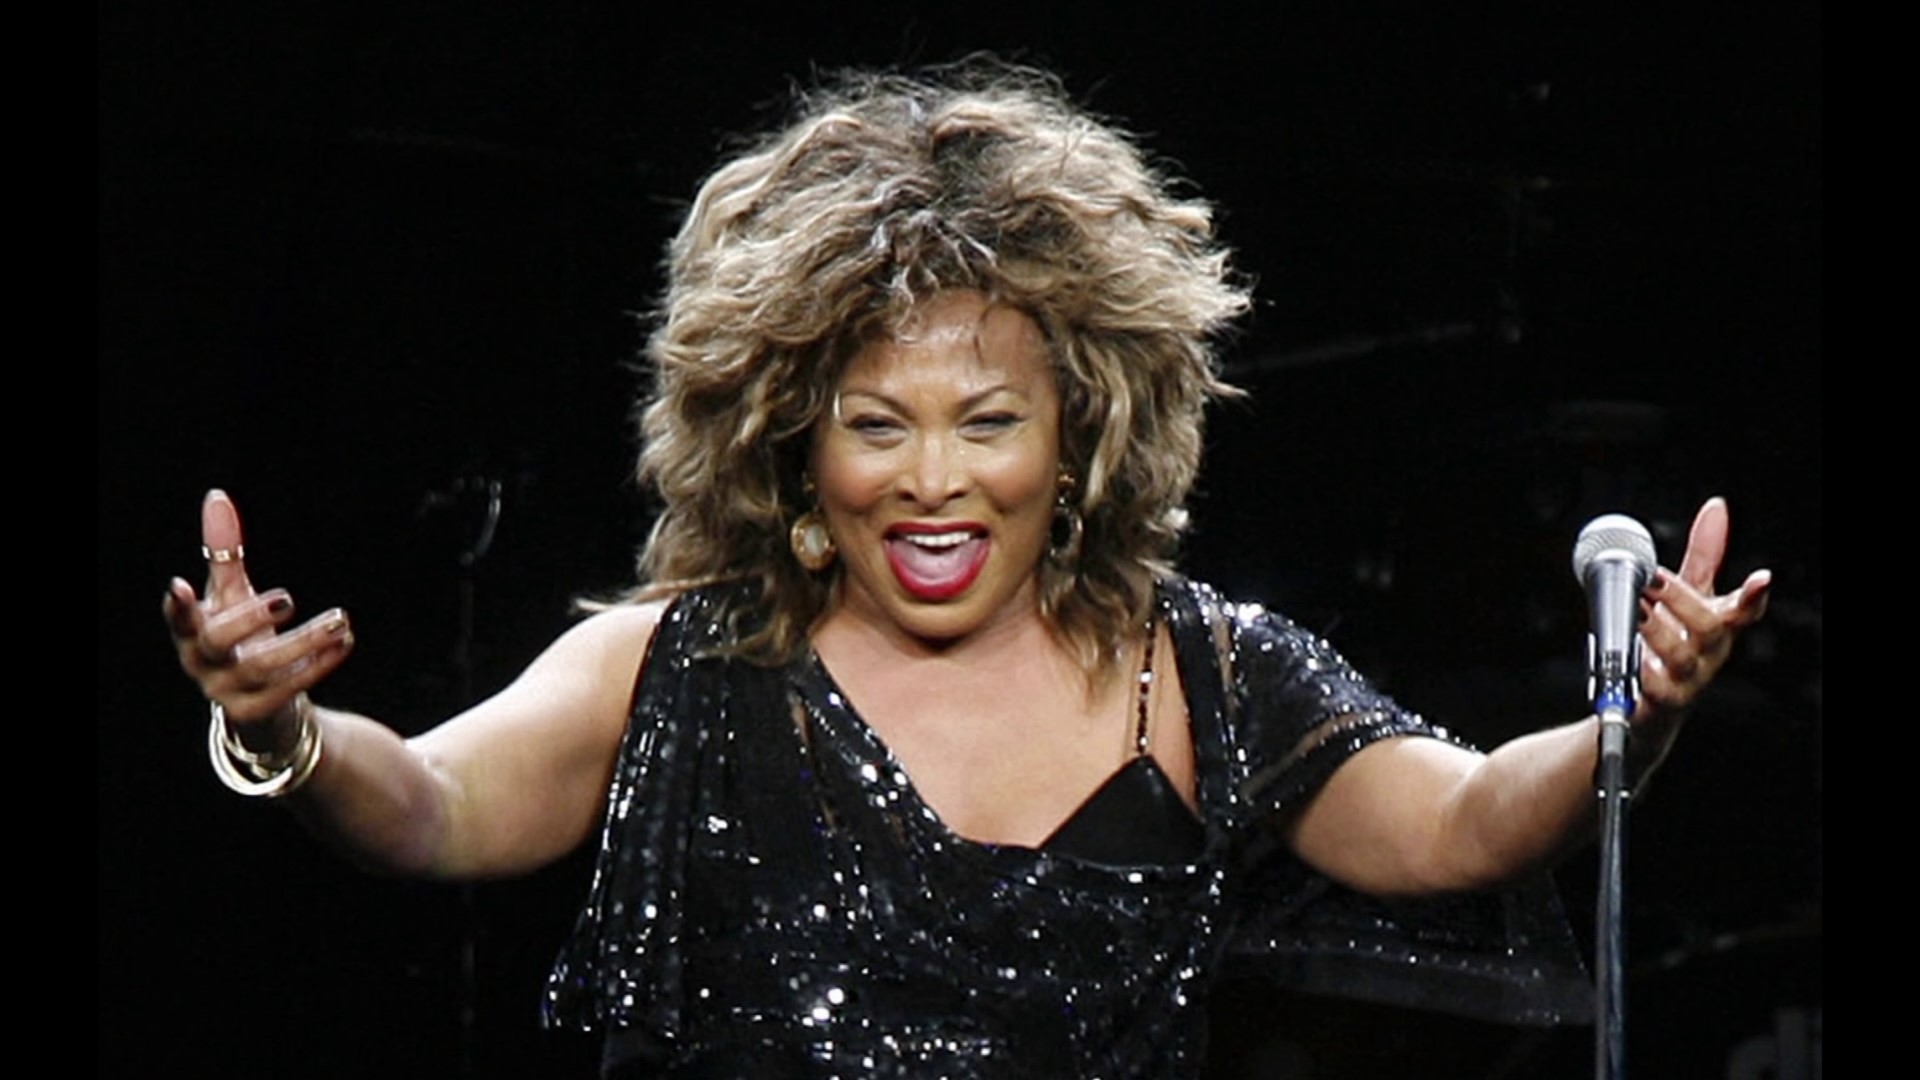 Tina Turner, the unstoppable singer and stage performer who teamed with husband Ike Turner for a dynamic run of hit records and live shows, has died at 83.